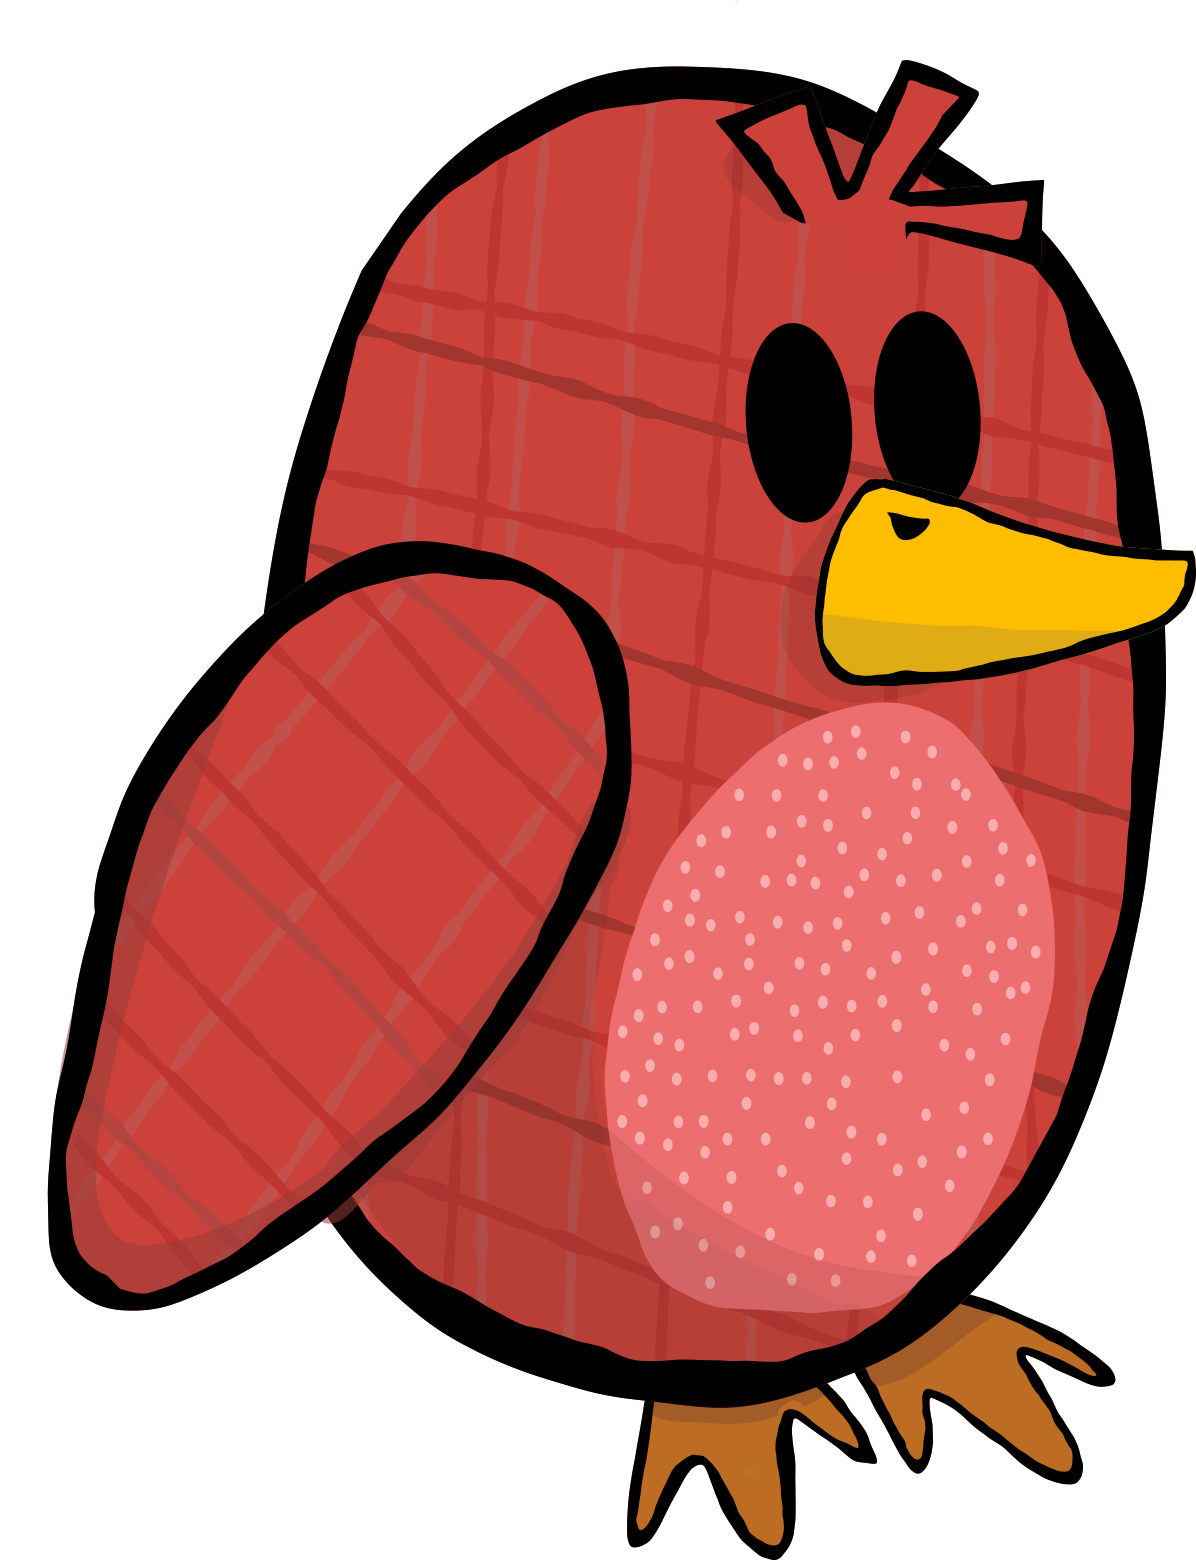 An illustration of the red bird puppet with a light plaid pattern. It has a dark yellow beak and light white speckles on its tummy.